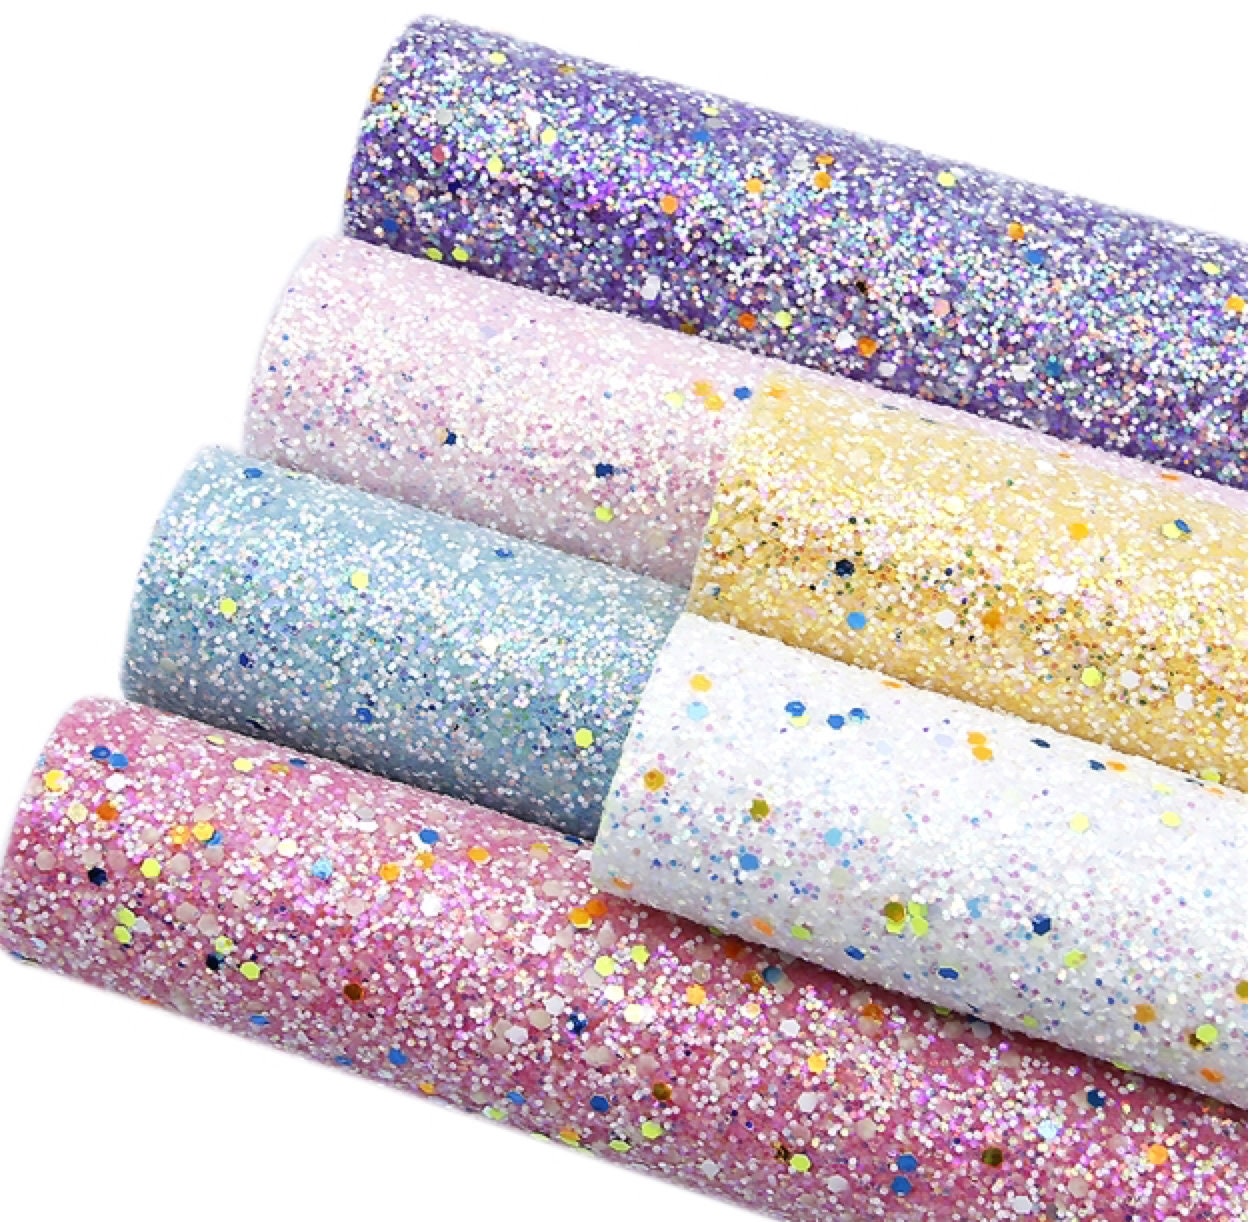 Glow in the Dark Chunky Glitter faux leather sheets great for baby bows, ear rings, girl bows, accessories, colorful, shiny TheFabricDude